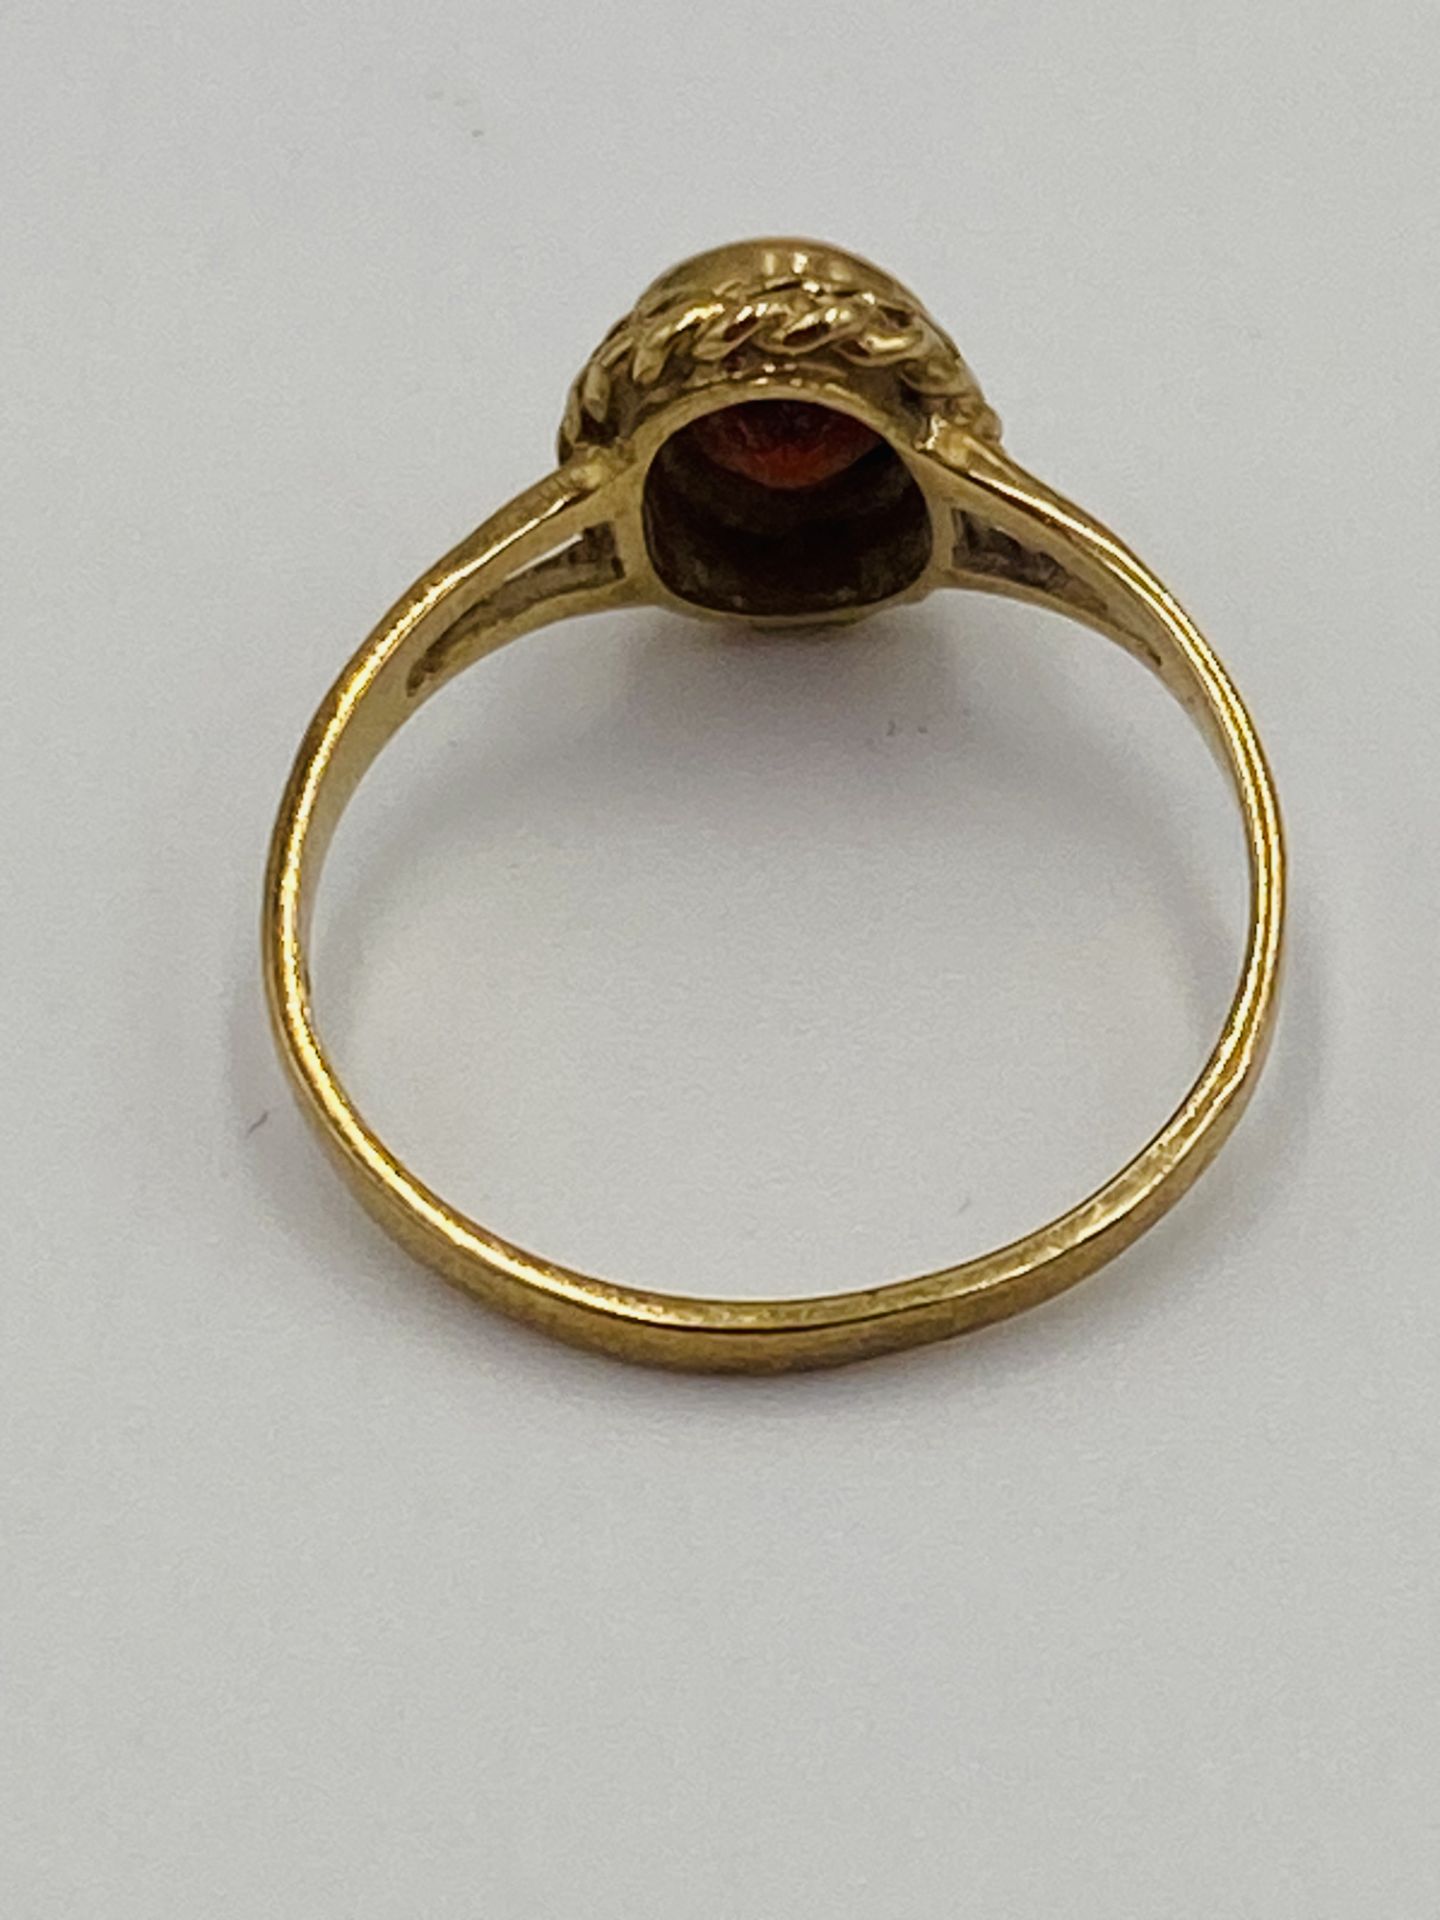 9ct gold ring set with a red stone - Image 4 of 5